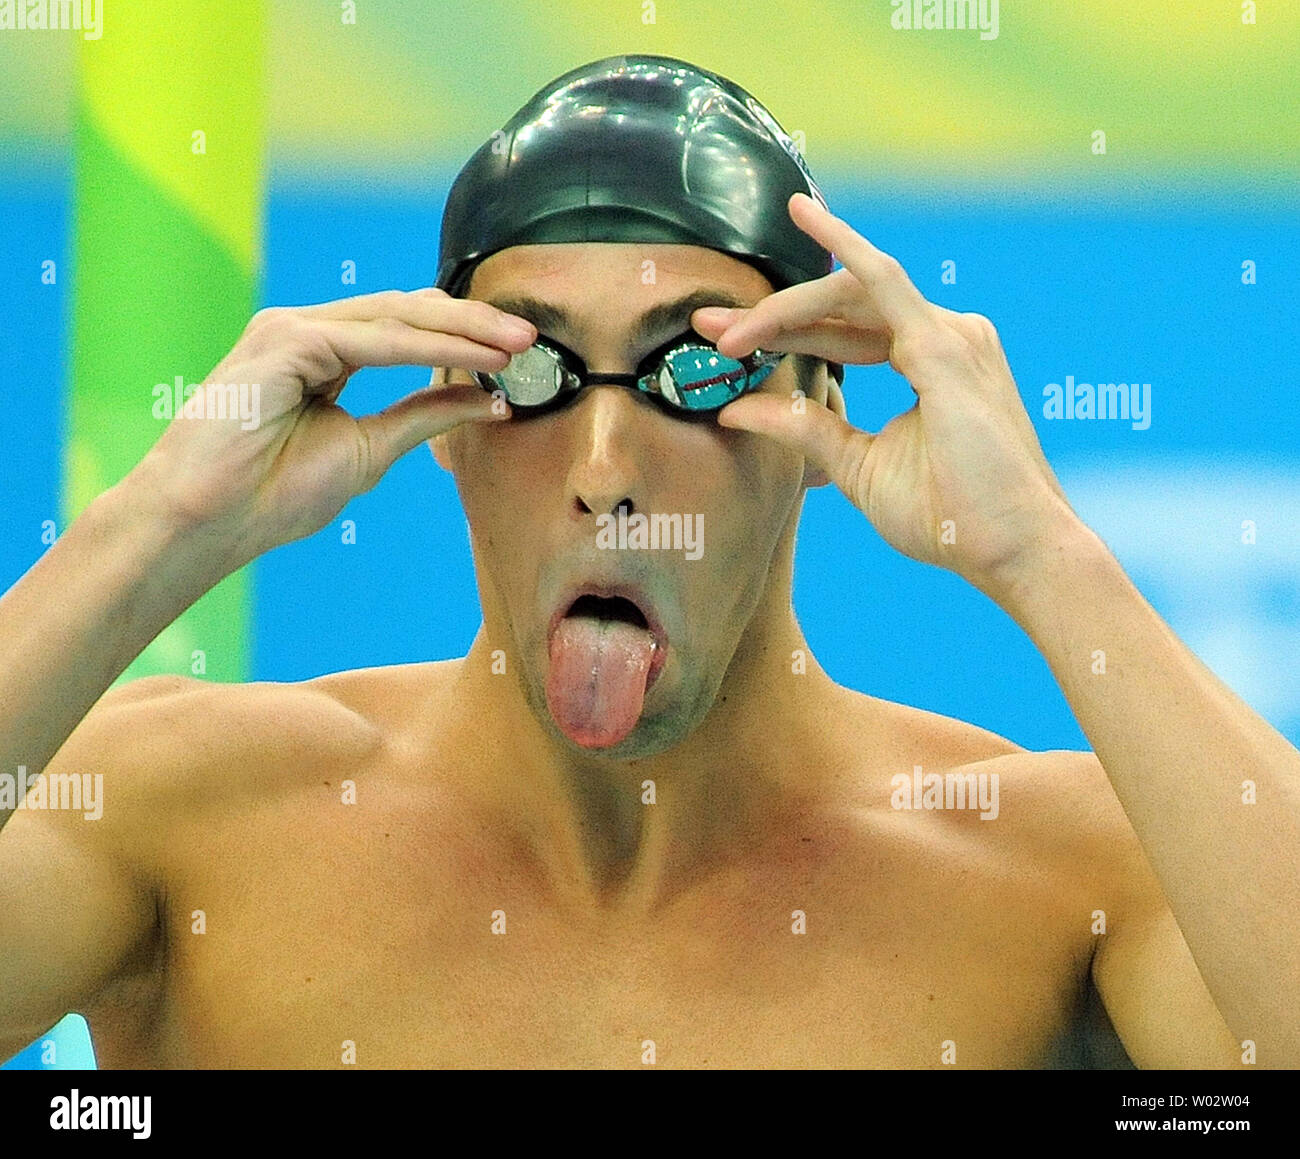 USA's Michael Phelps adjusts his goggles before competing in the Men's 400  Meter Individual Medley final at the National Aquatic Center (Water Cube)  during the 2008 Summer Olympics in Beijing, China, on